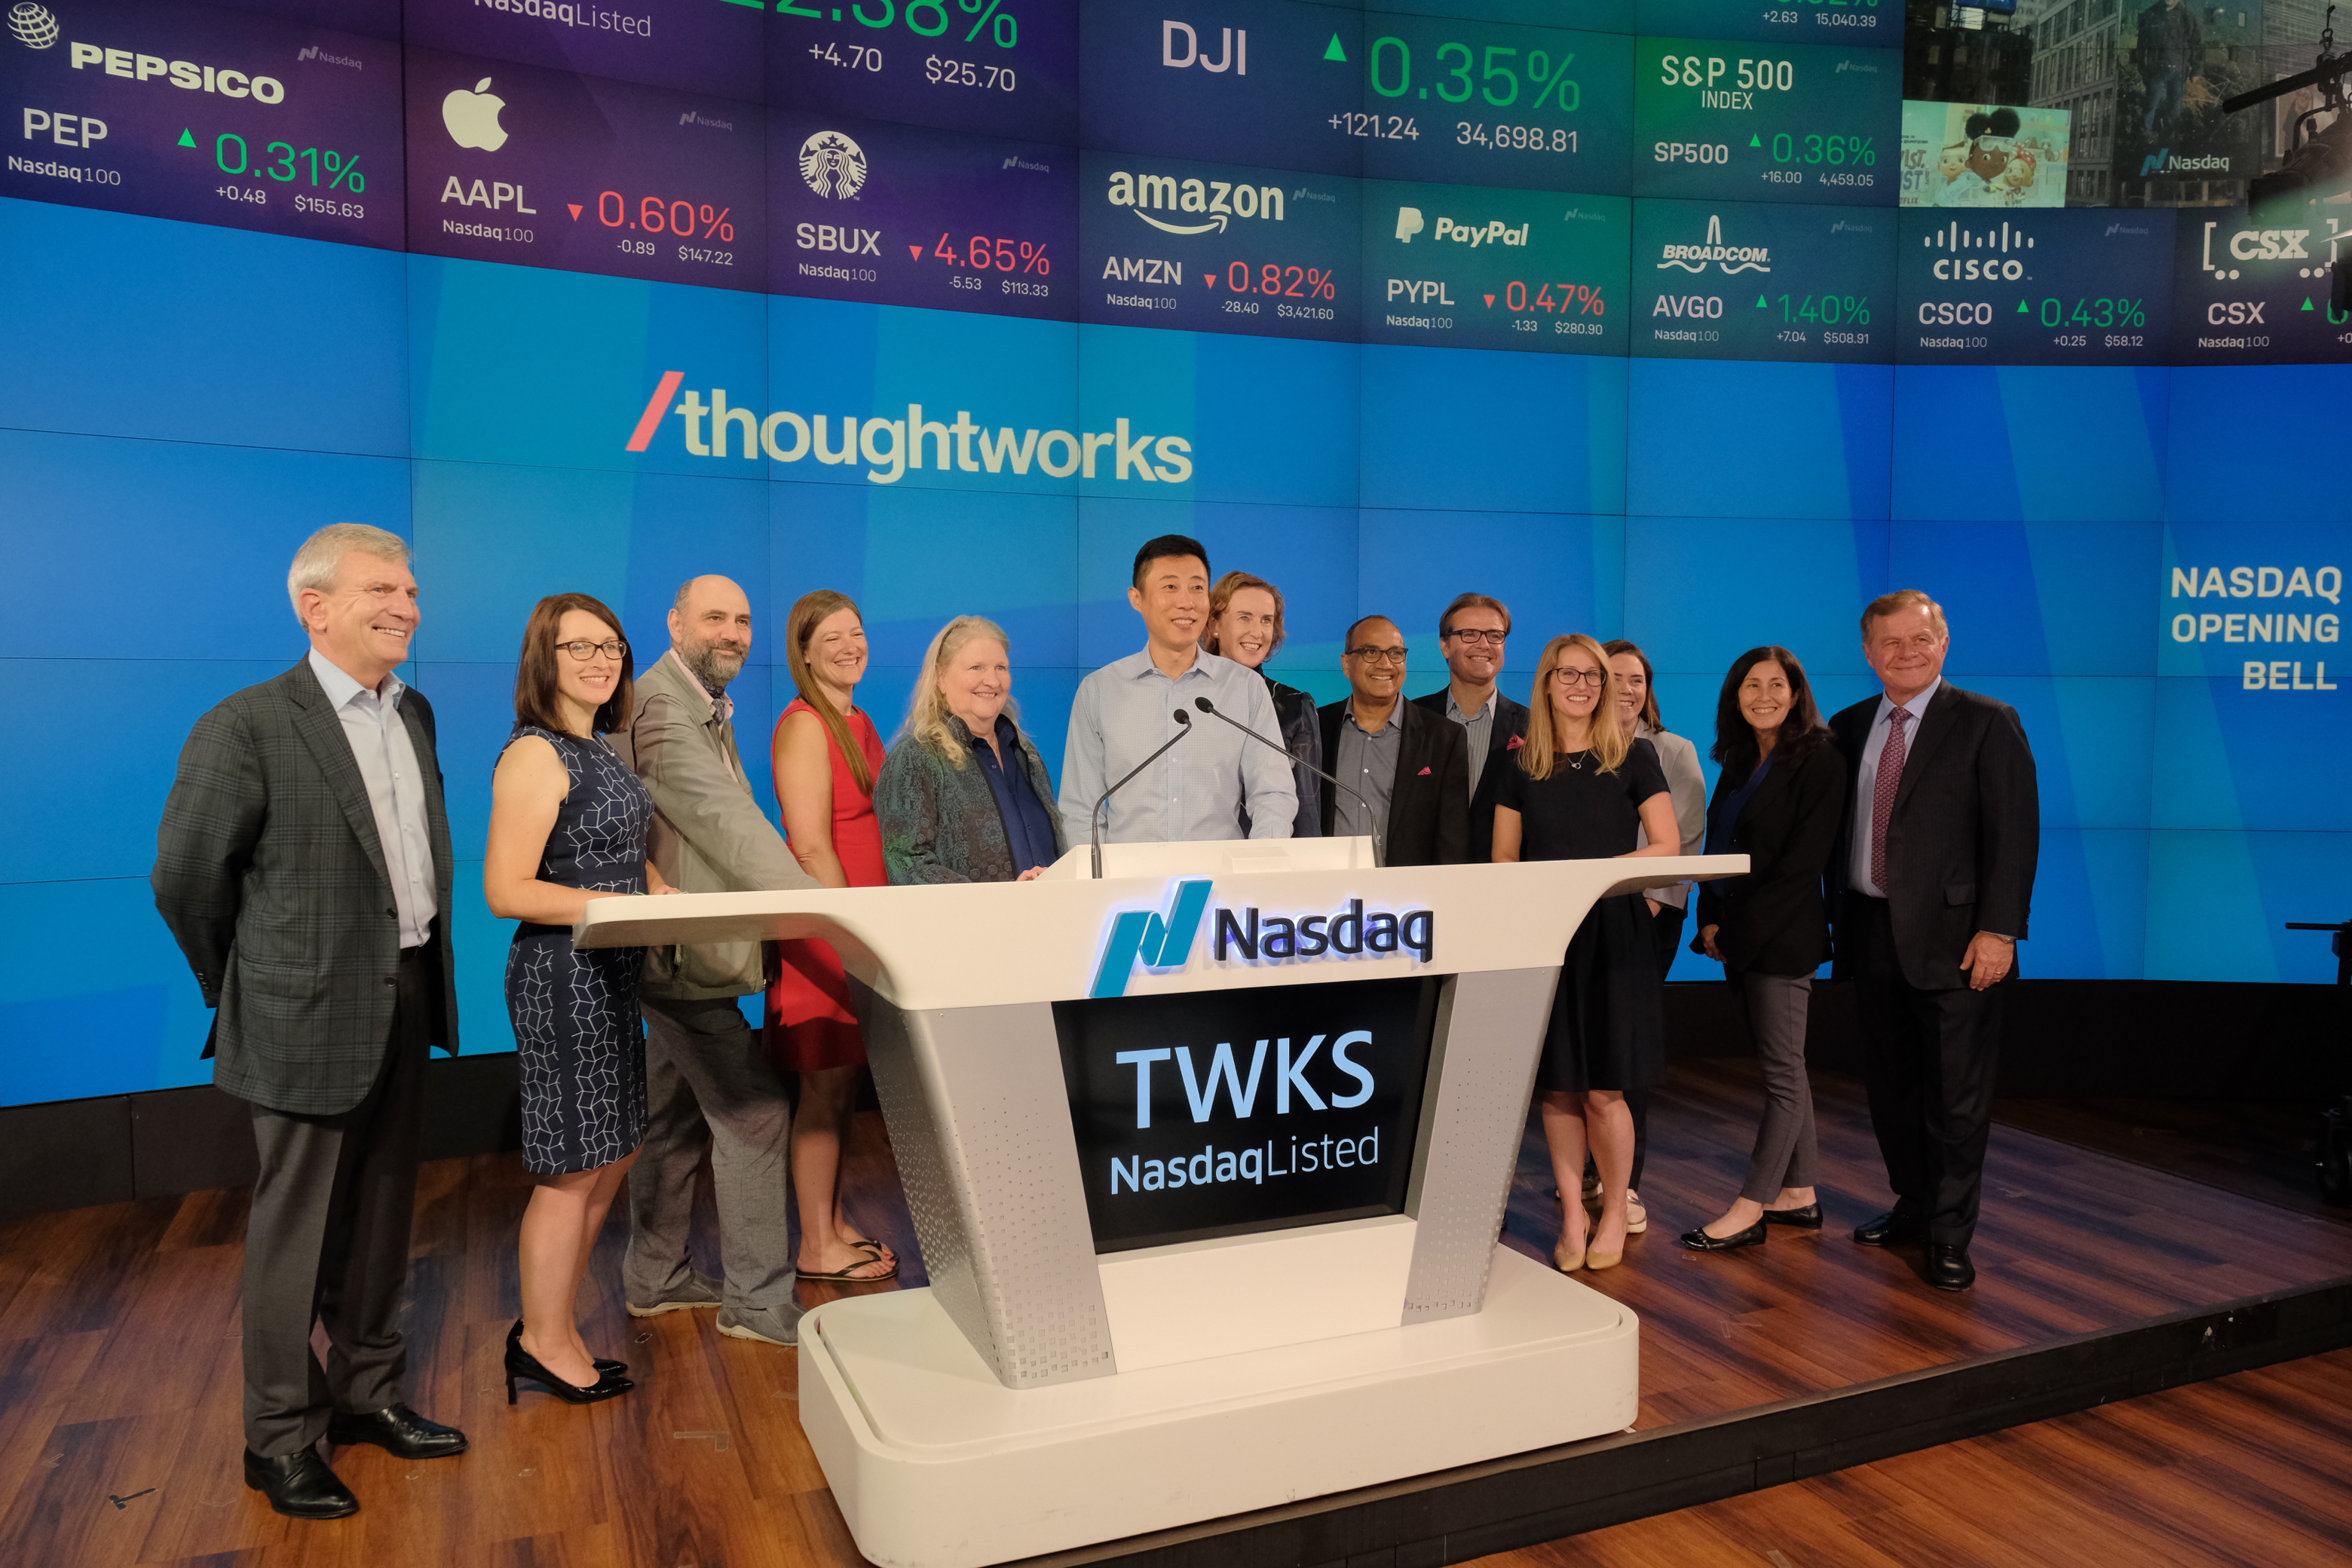 Thoughtworks on X: "What an incredible day it has been! Thank you everyone for your kind words and messages. Thank you @Nasdaq. And now we continue on with our journey of delivering #